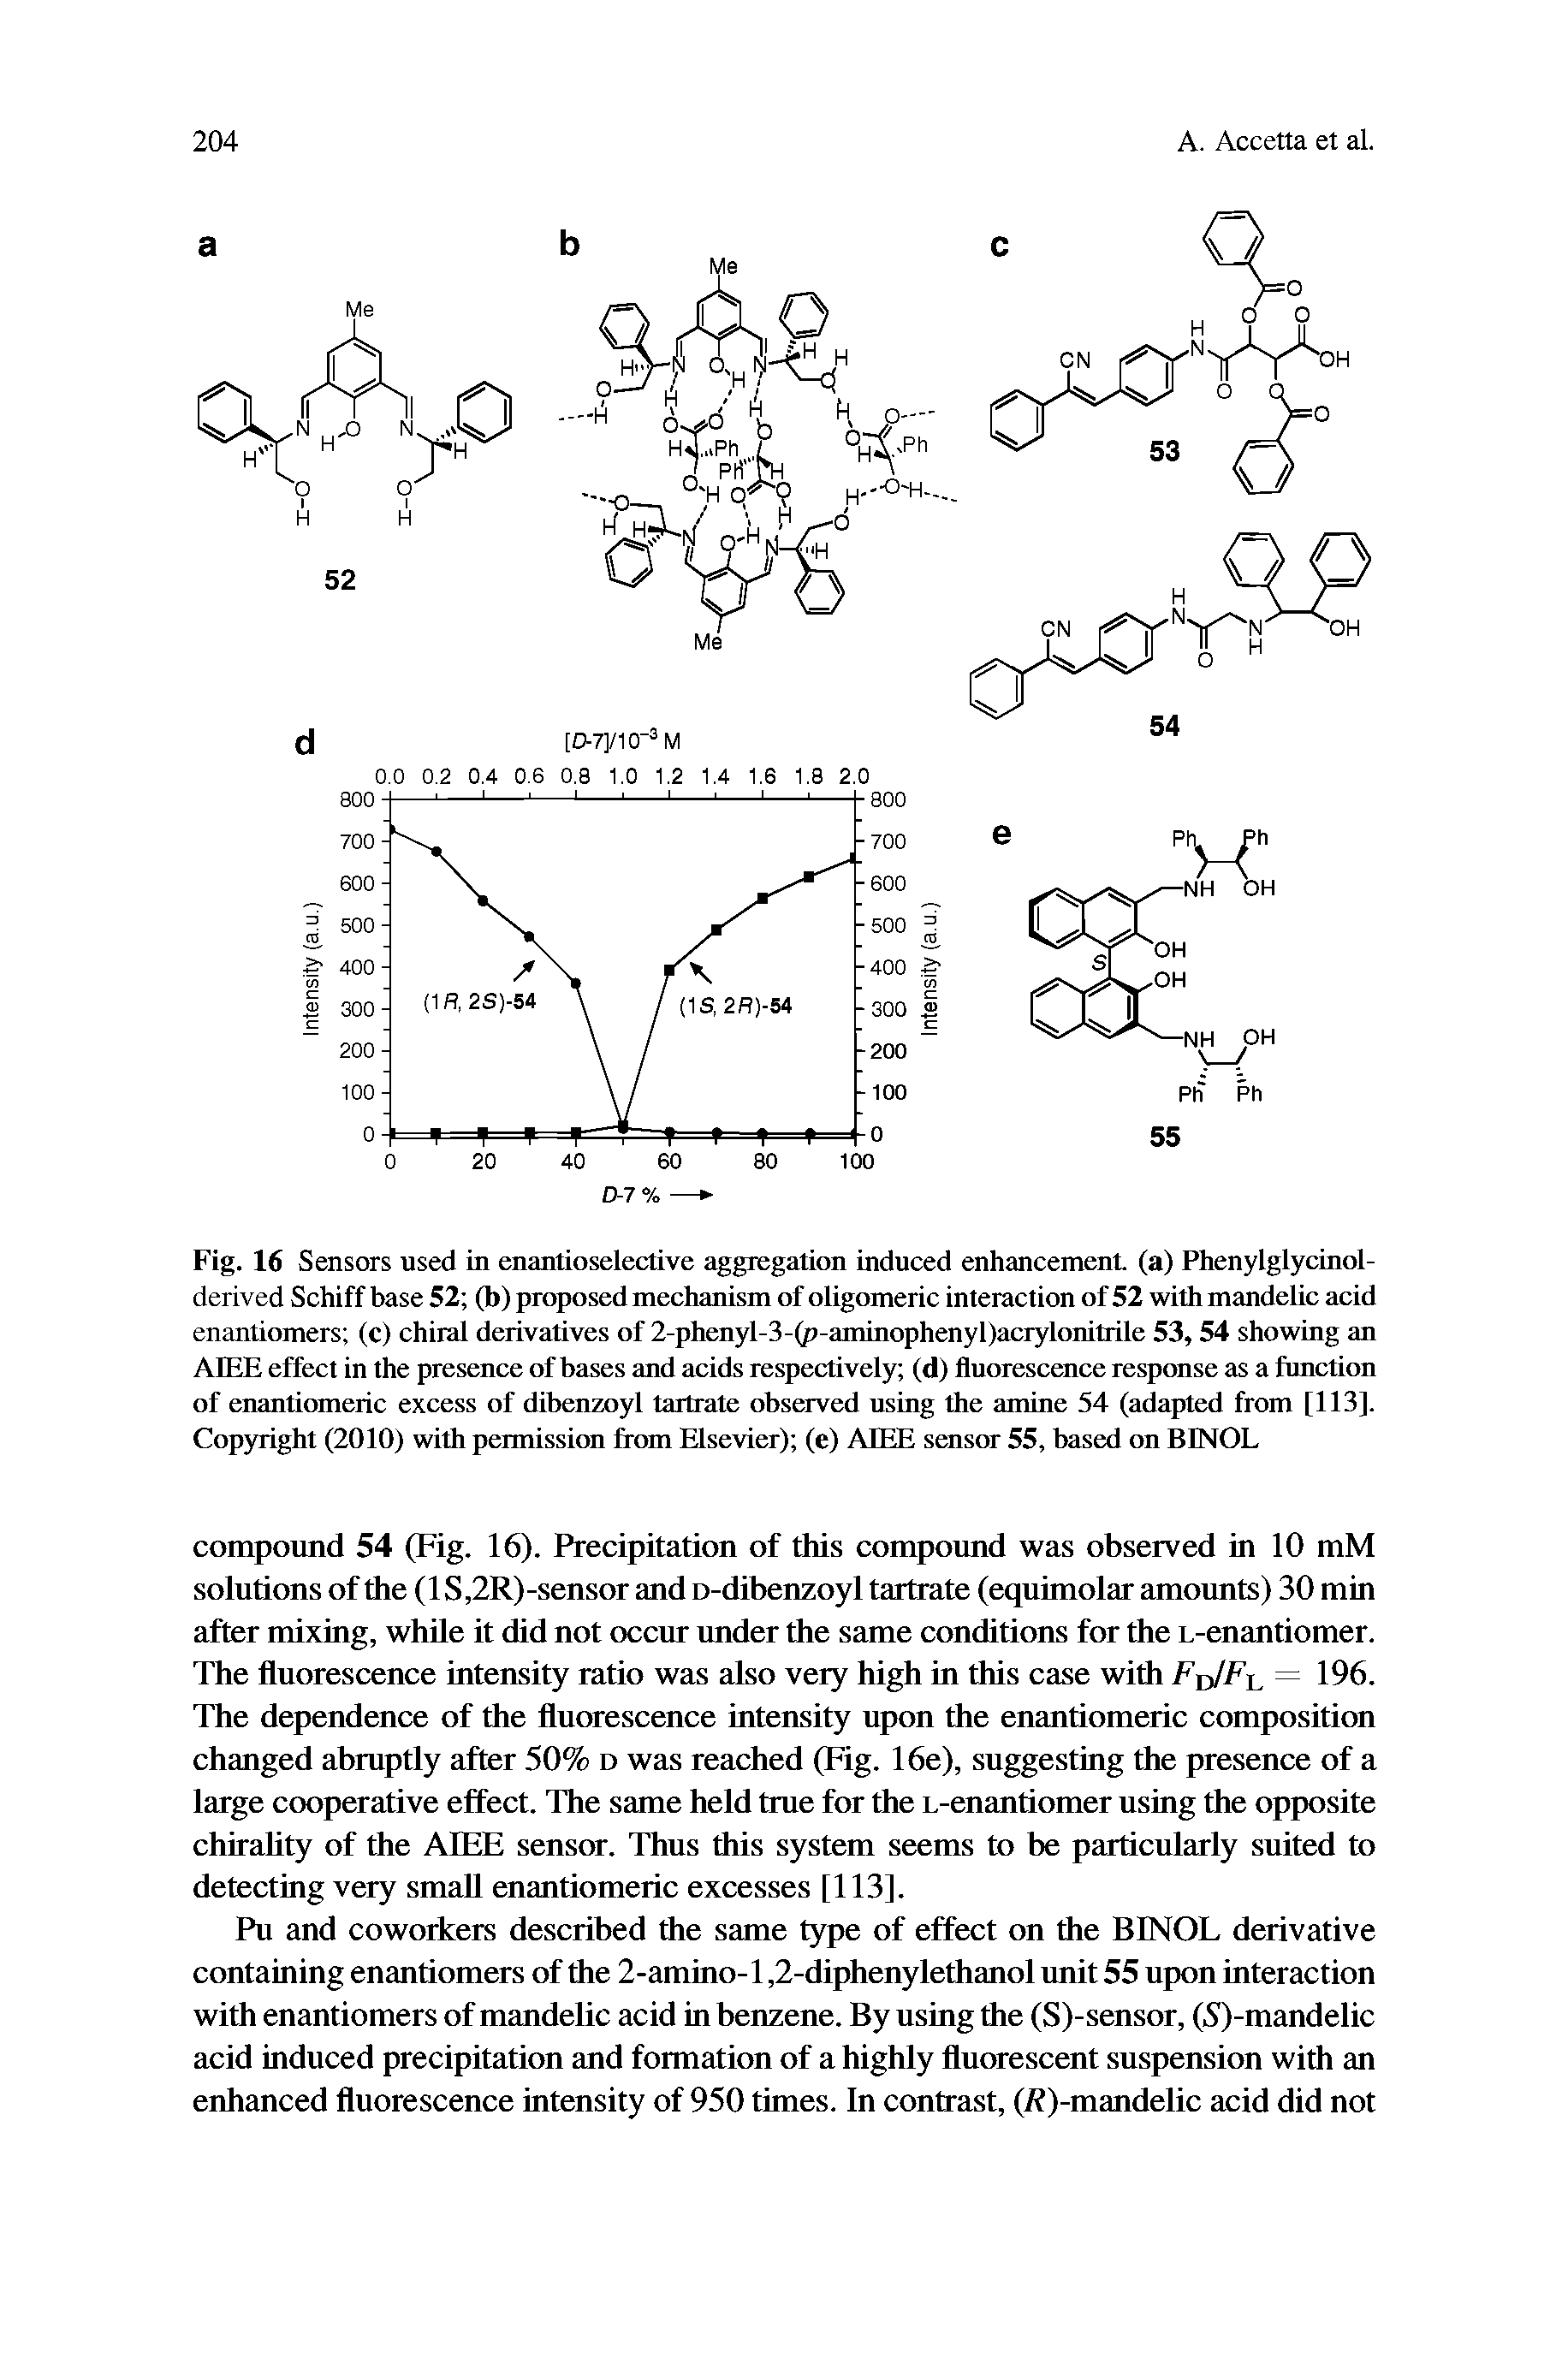 Fig. 16 Sensors used in enantioselective aggregation induced enhancement (a) Phenylglycinol-derived Schiff base 52 (b) proposed mechanism of oligomeric interaction of 52 with mandelic acid enantiomers (c) chiral derivatives of 2-phenyl-3-(p-ammophenyl)acrylonitrile 53,54 showing an AIEE effect in the presence of bases and acids respectively (d) fluorescence response as a function of enantiomeric excess of dibenzoyl tartrate observed using the amine 54 (adapted from [113]. Copyright (2010) with permission from Elsevier) (e) AIEE sensor 55, based on BINOL...